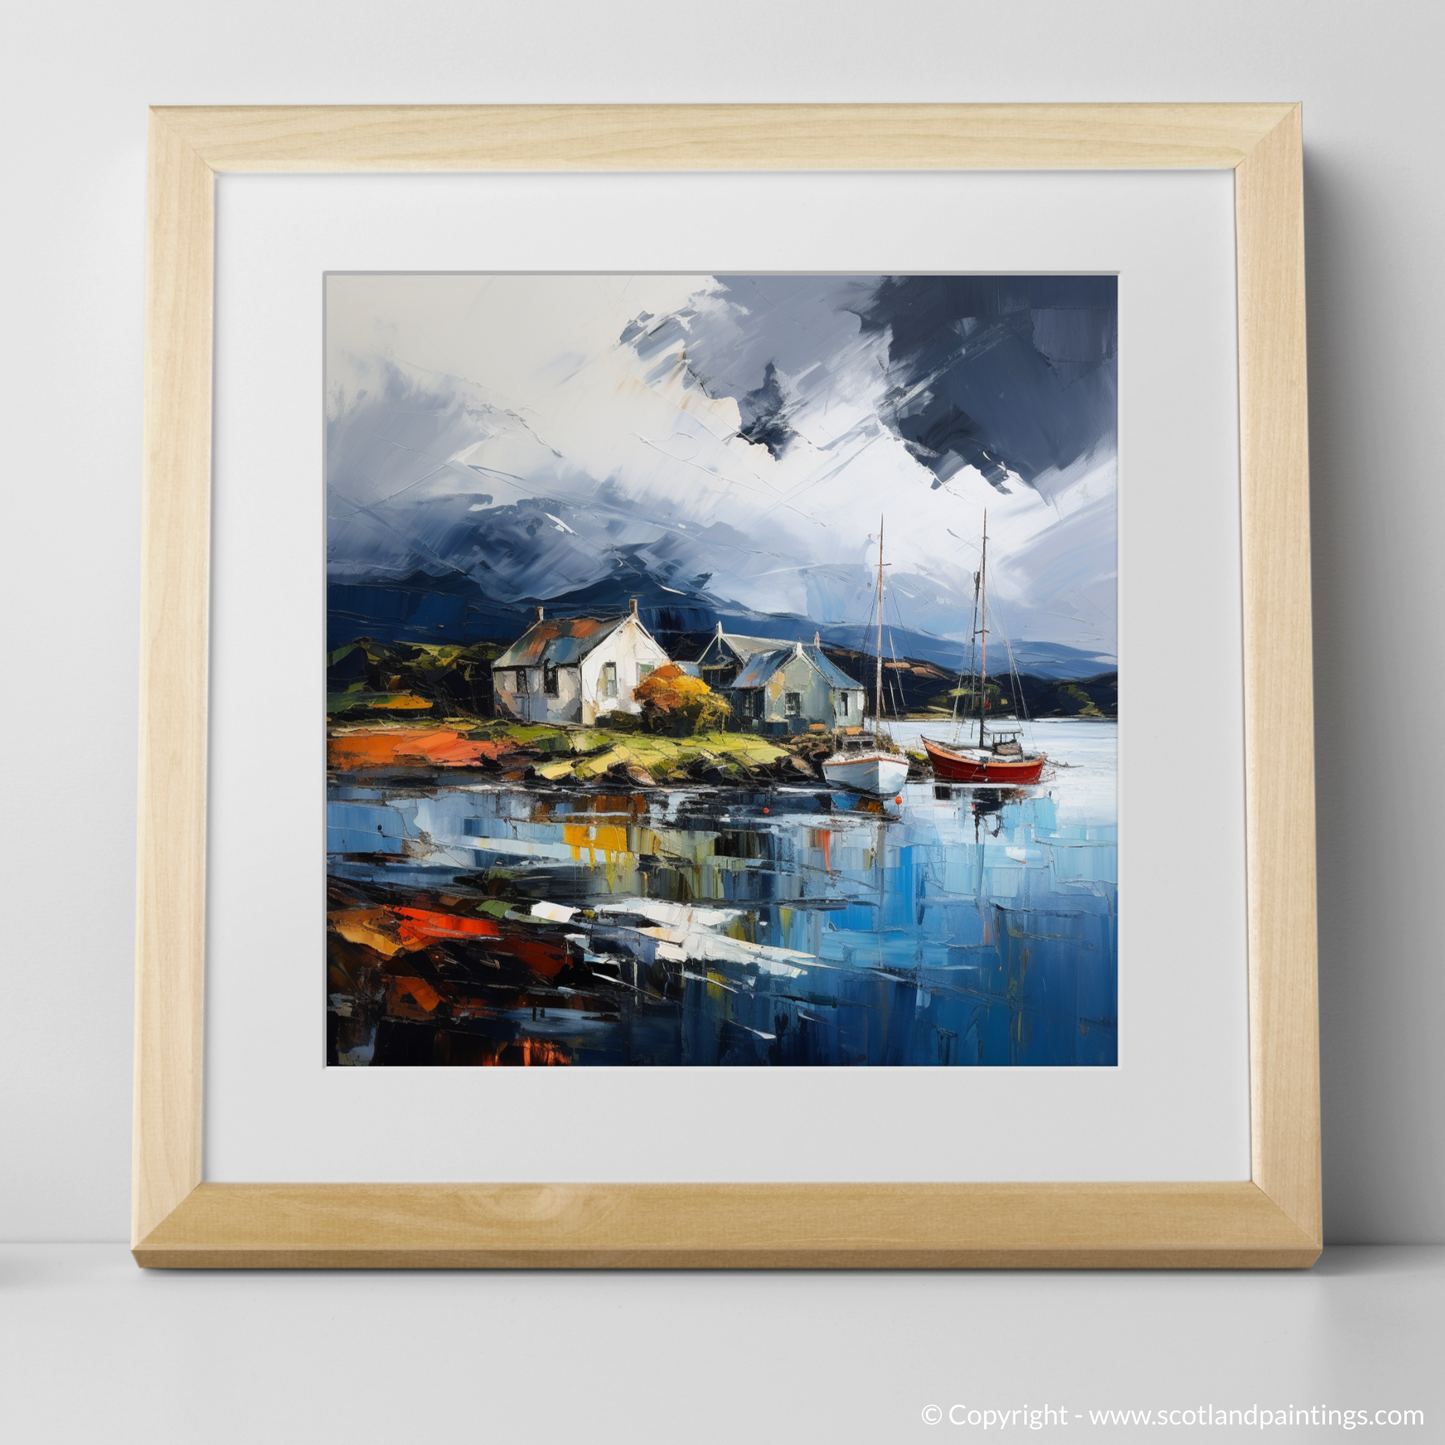 Art Print of Port Appin Harbour with a stormy sky with a natural frame